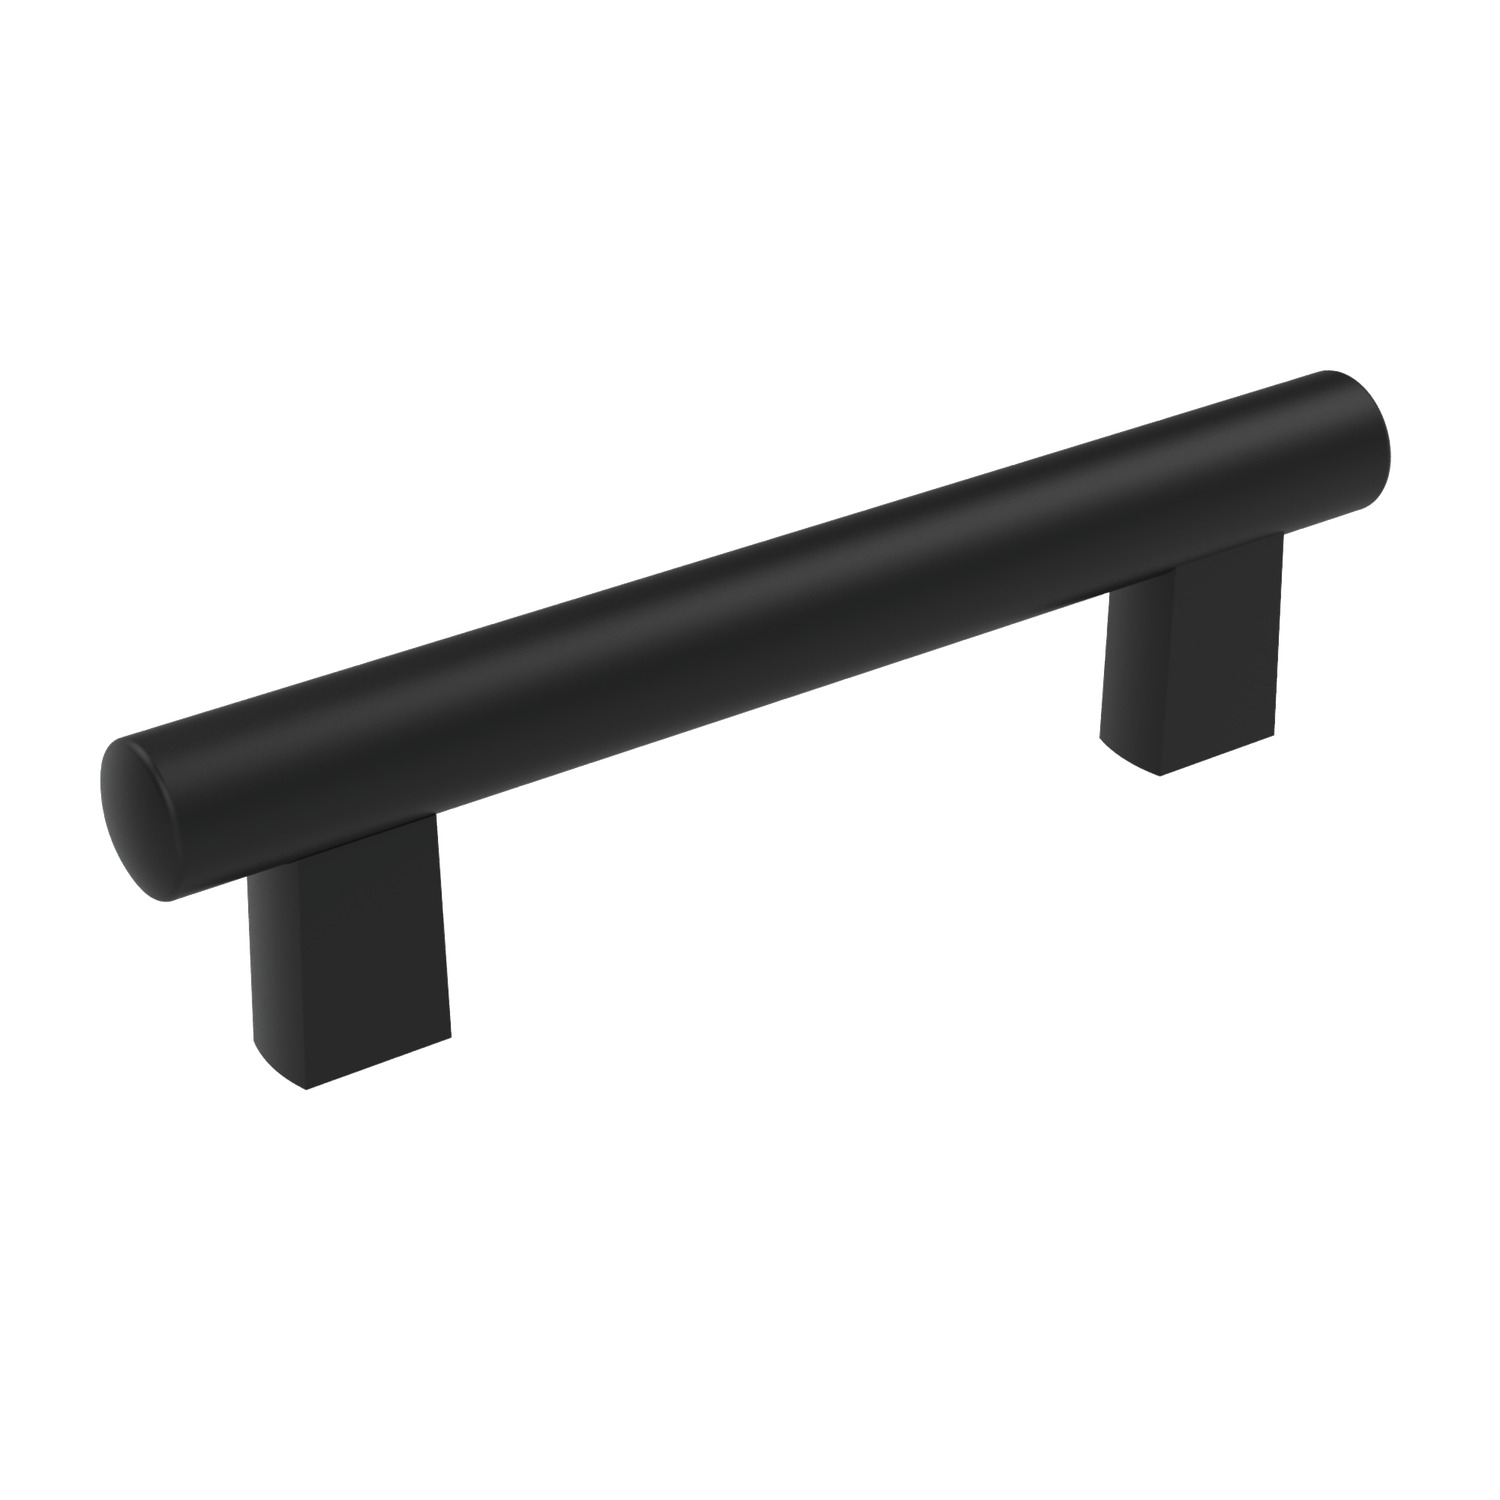 Pull Handles - Tube Type Polyamide tube design handle. Screwed connection from the shank to the tube with non-detachable blind rivet prevents it being pulled off.